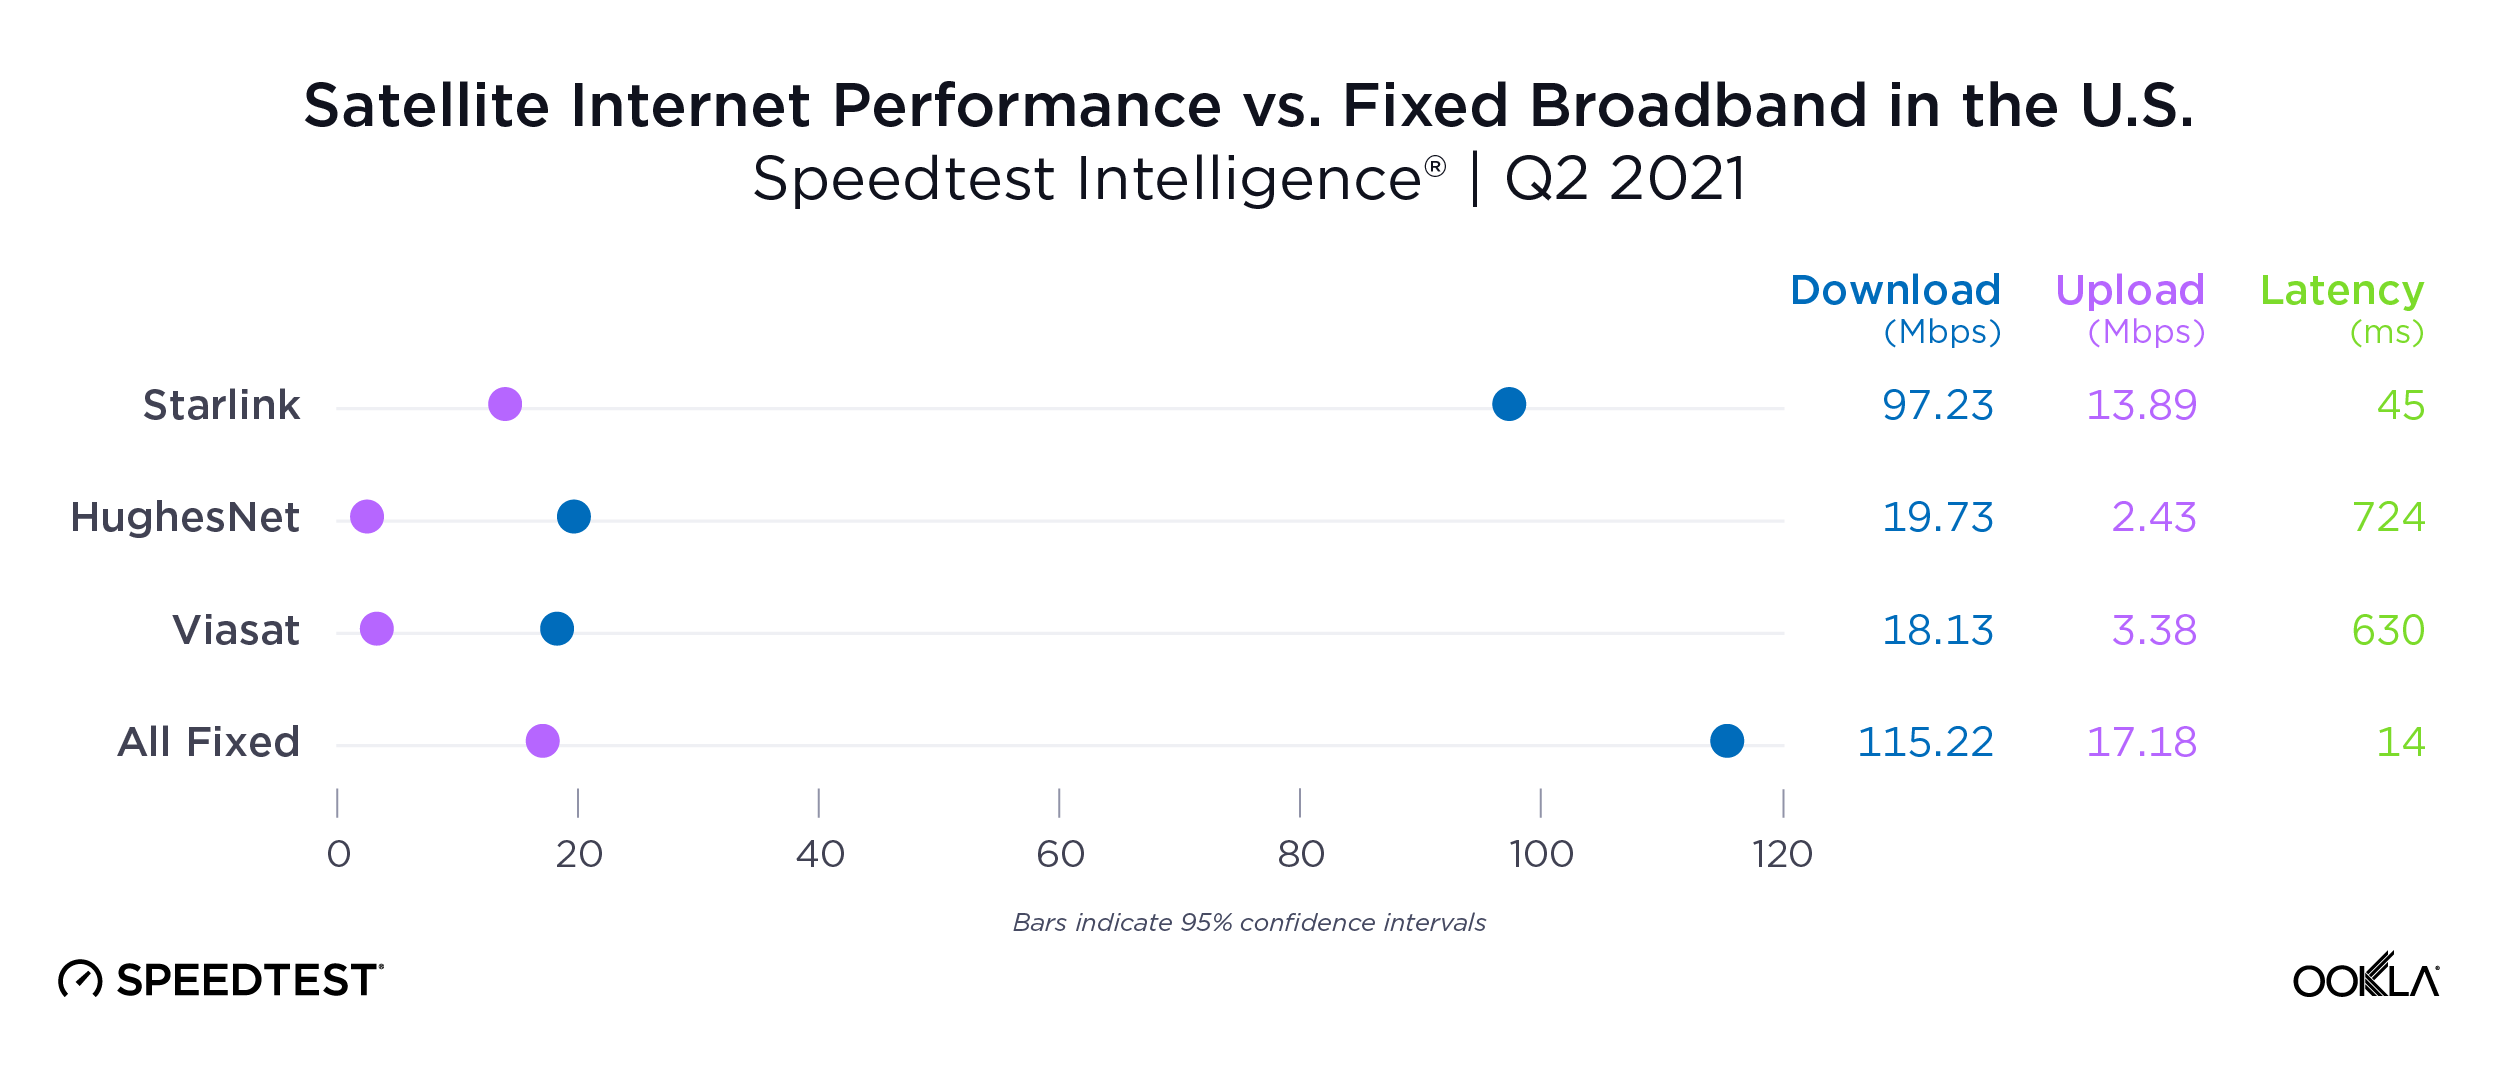 Ookla's results chart show Starlink leading in both download and upload speeds compared to HughesNet and Viasat.  (Image: Ookla)